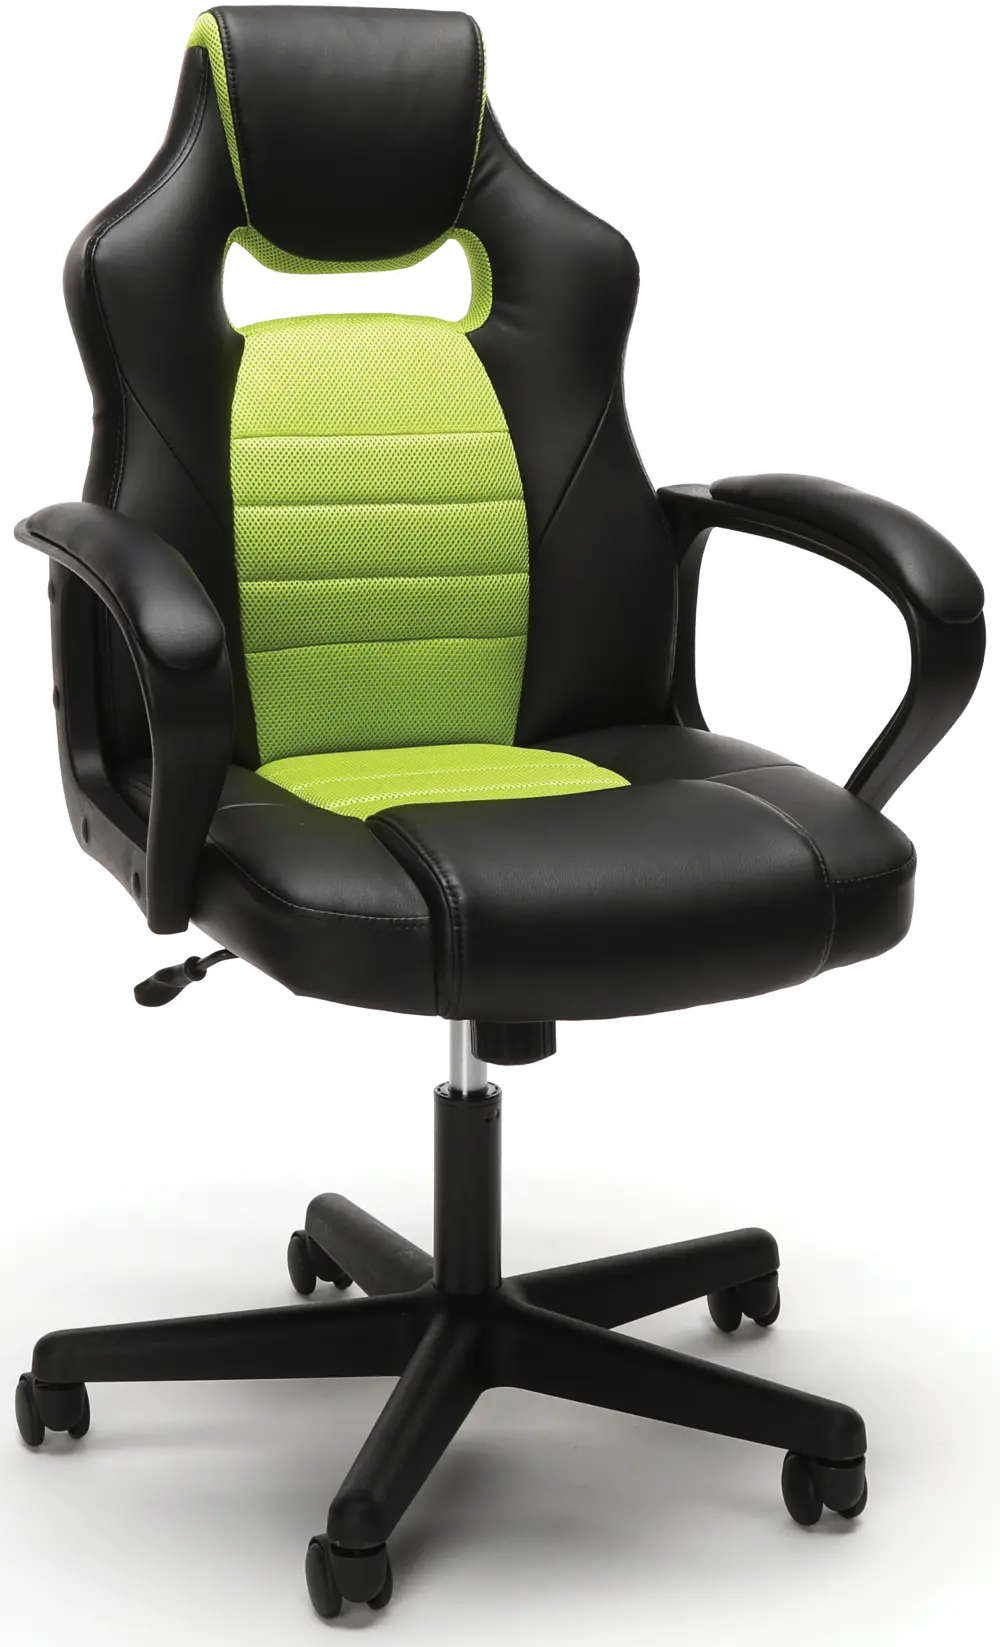 Green and Black Racing Style Gaming Chair - Essentials-1